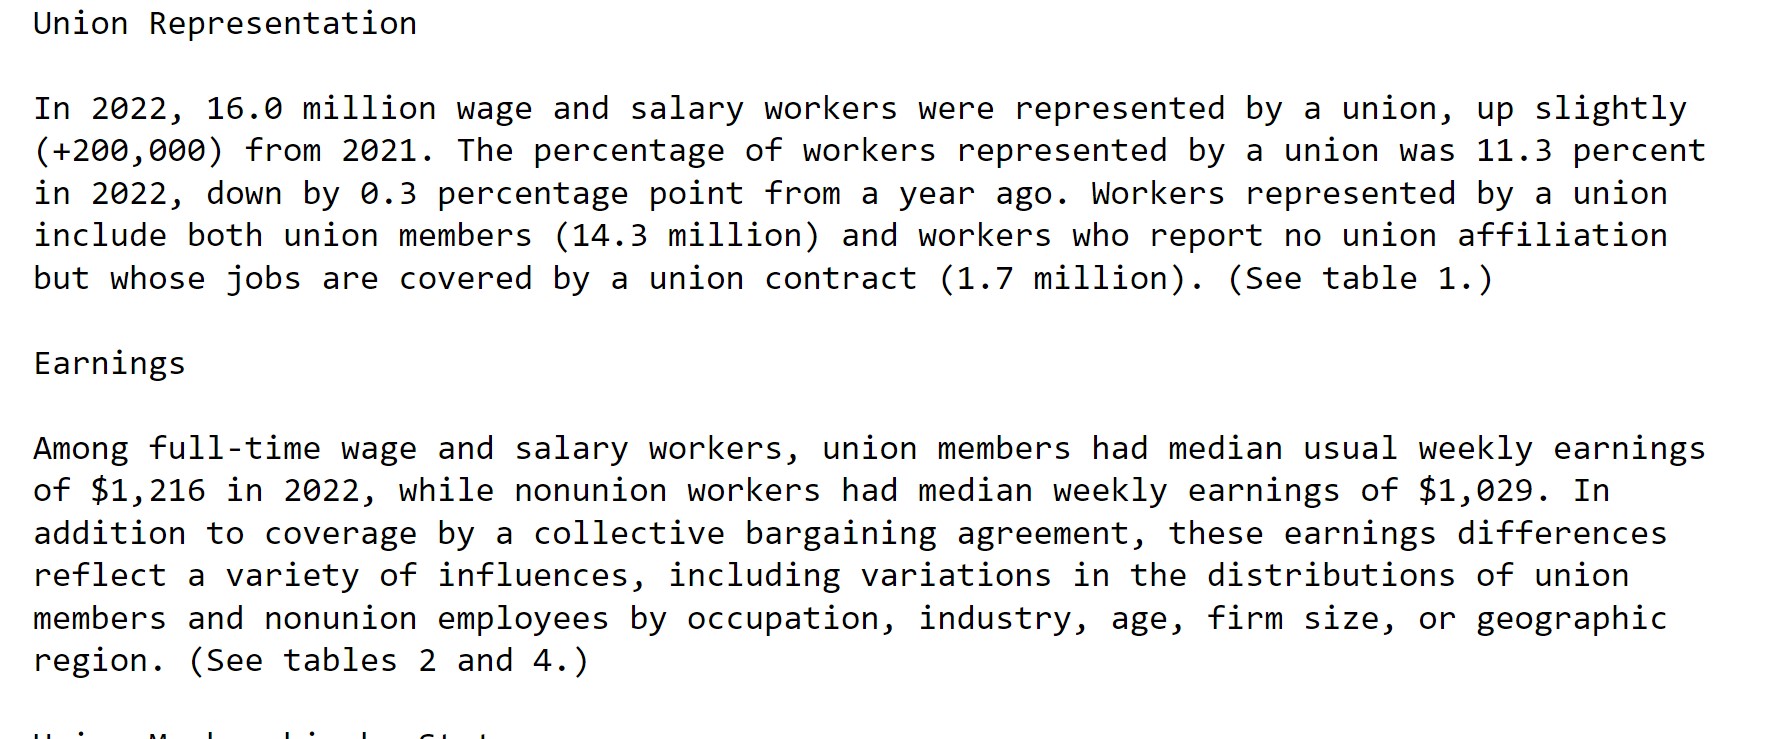 Union Rep. Wage and Salary 2022 Report